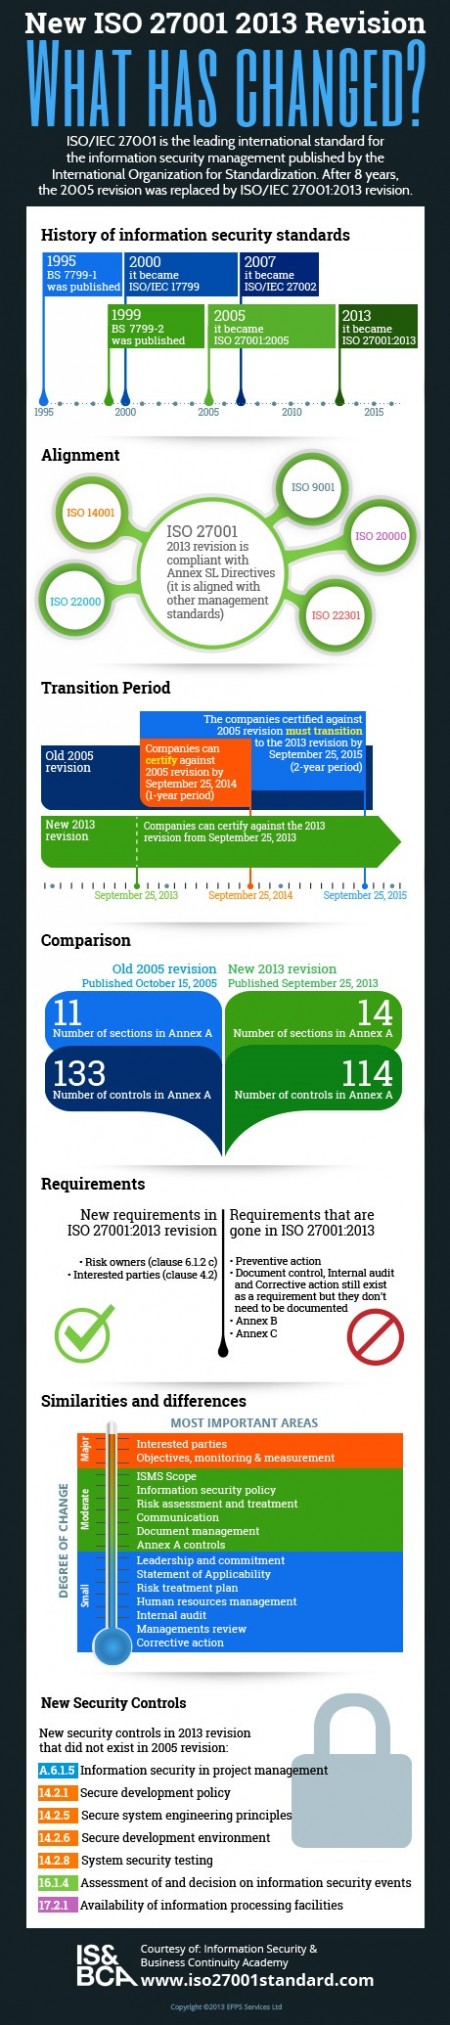 Infographic_New_ISO_27001_2013_Revision2-450x20251